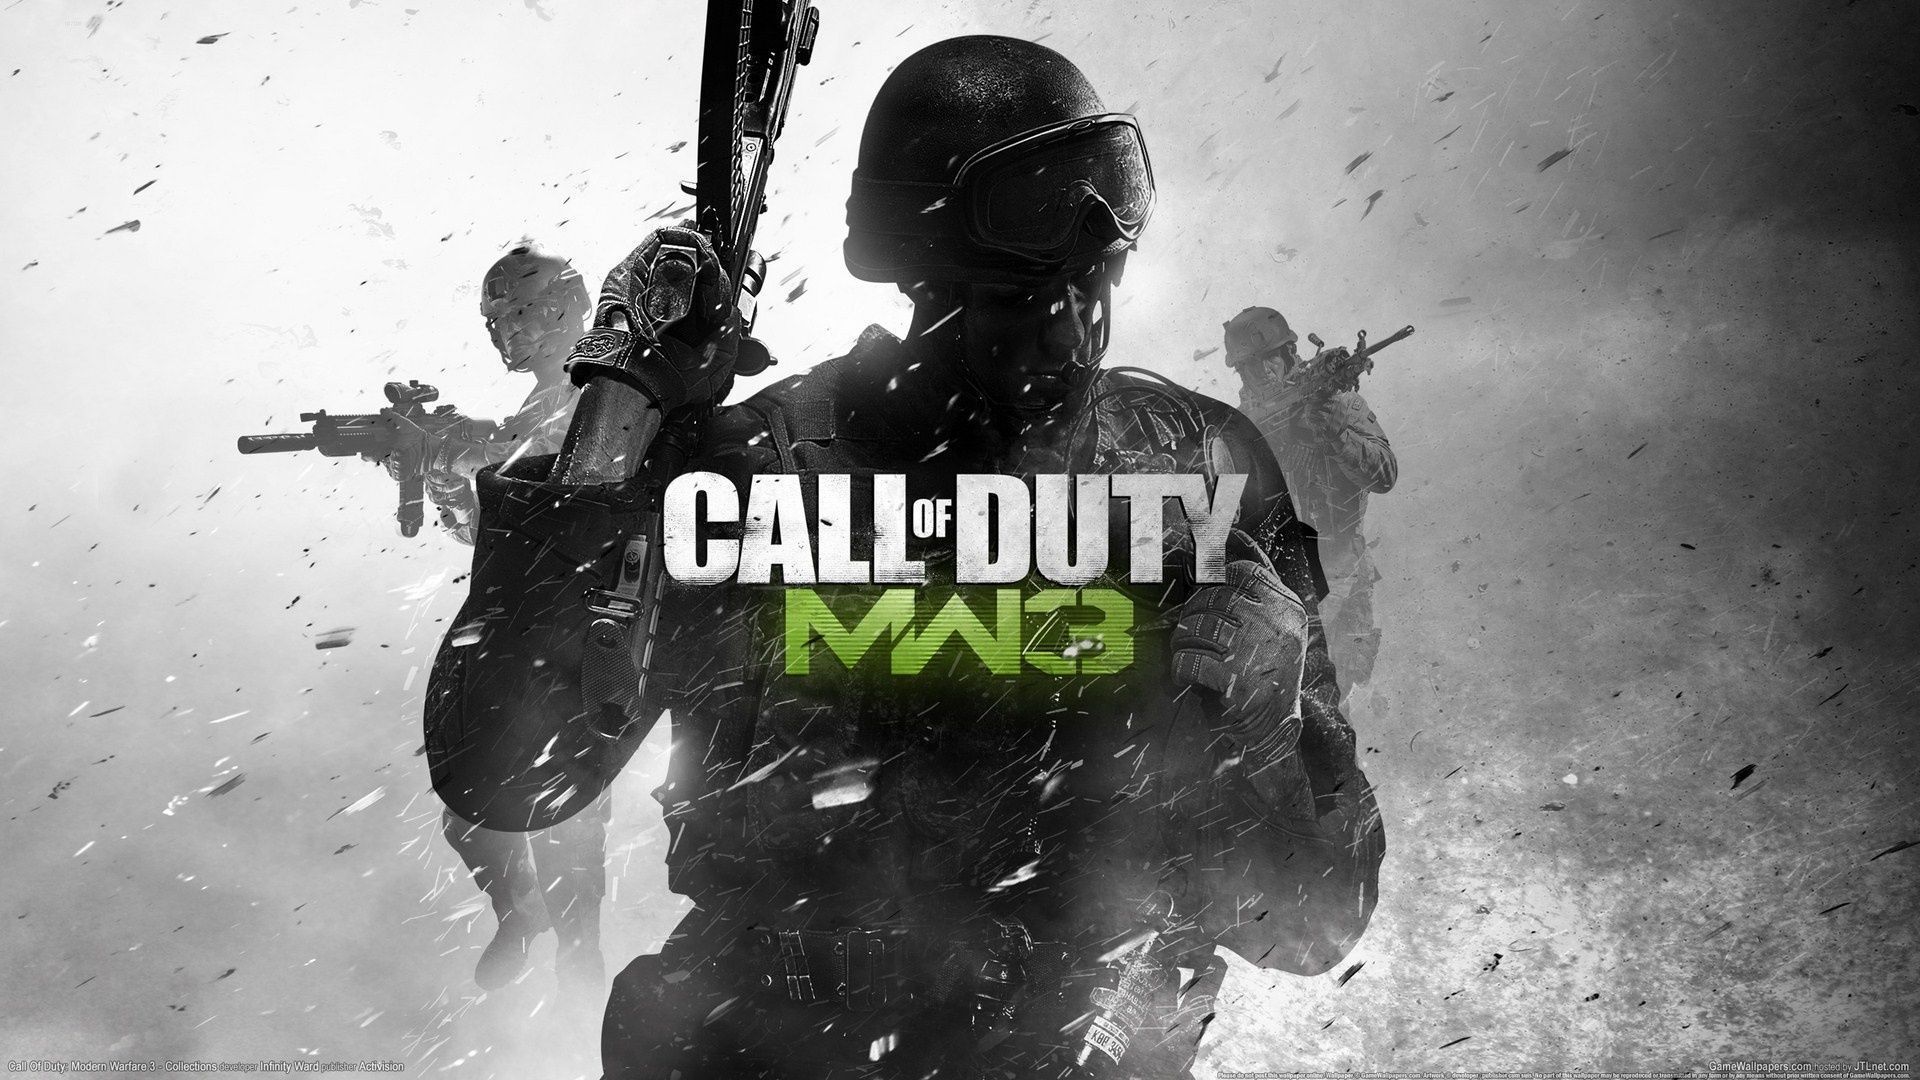 HD Quality War Game Call of Duty MW3 Wallpapers 6 Full Size ...